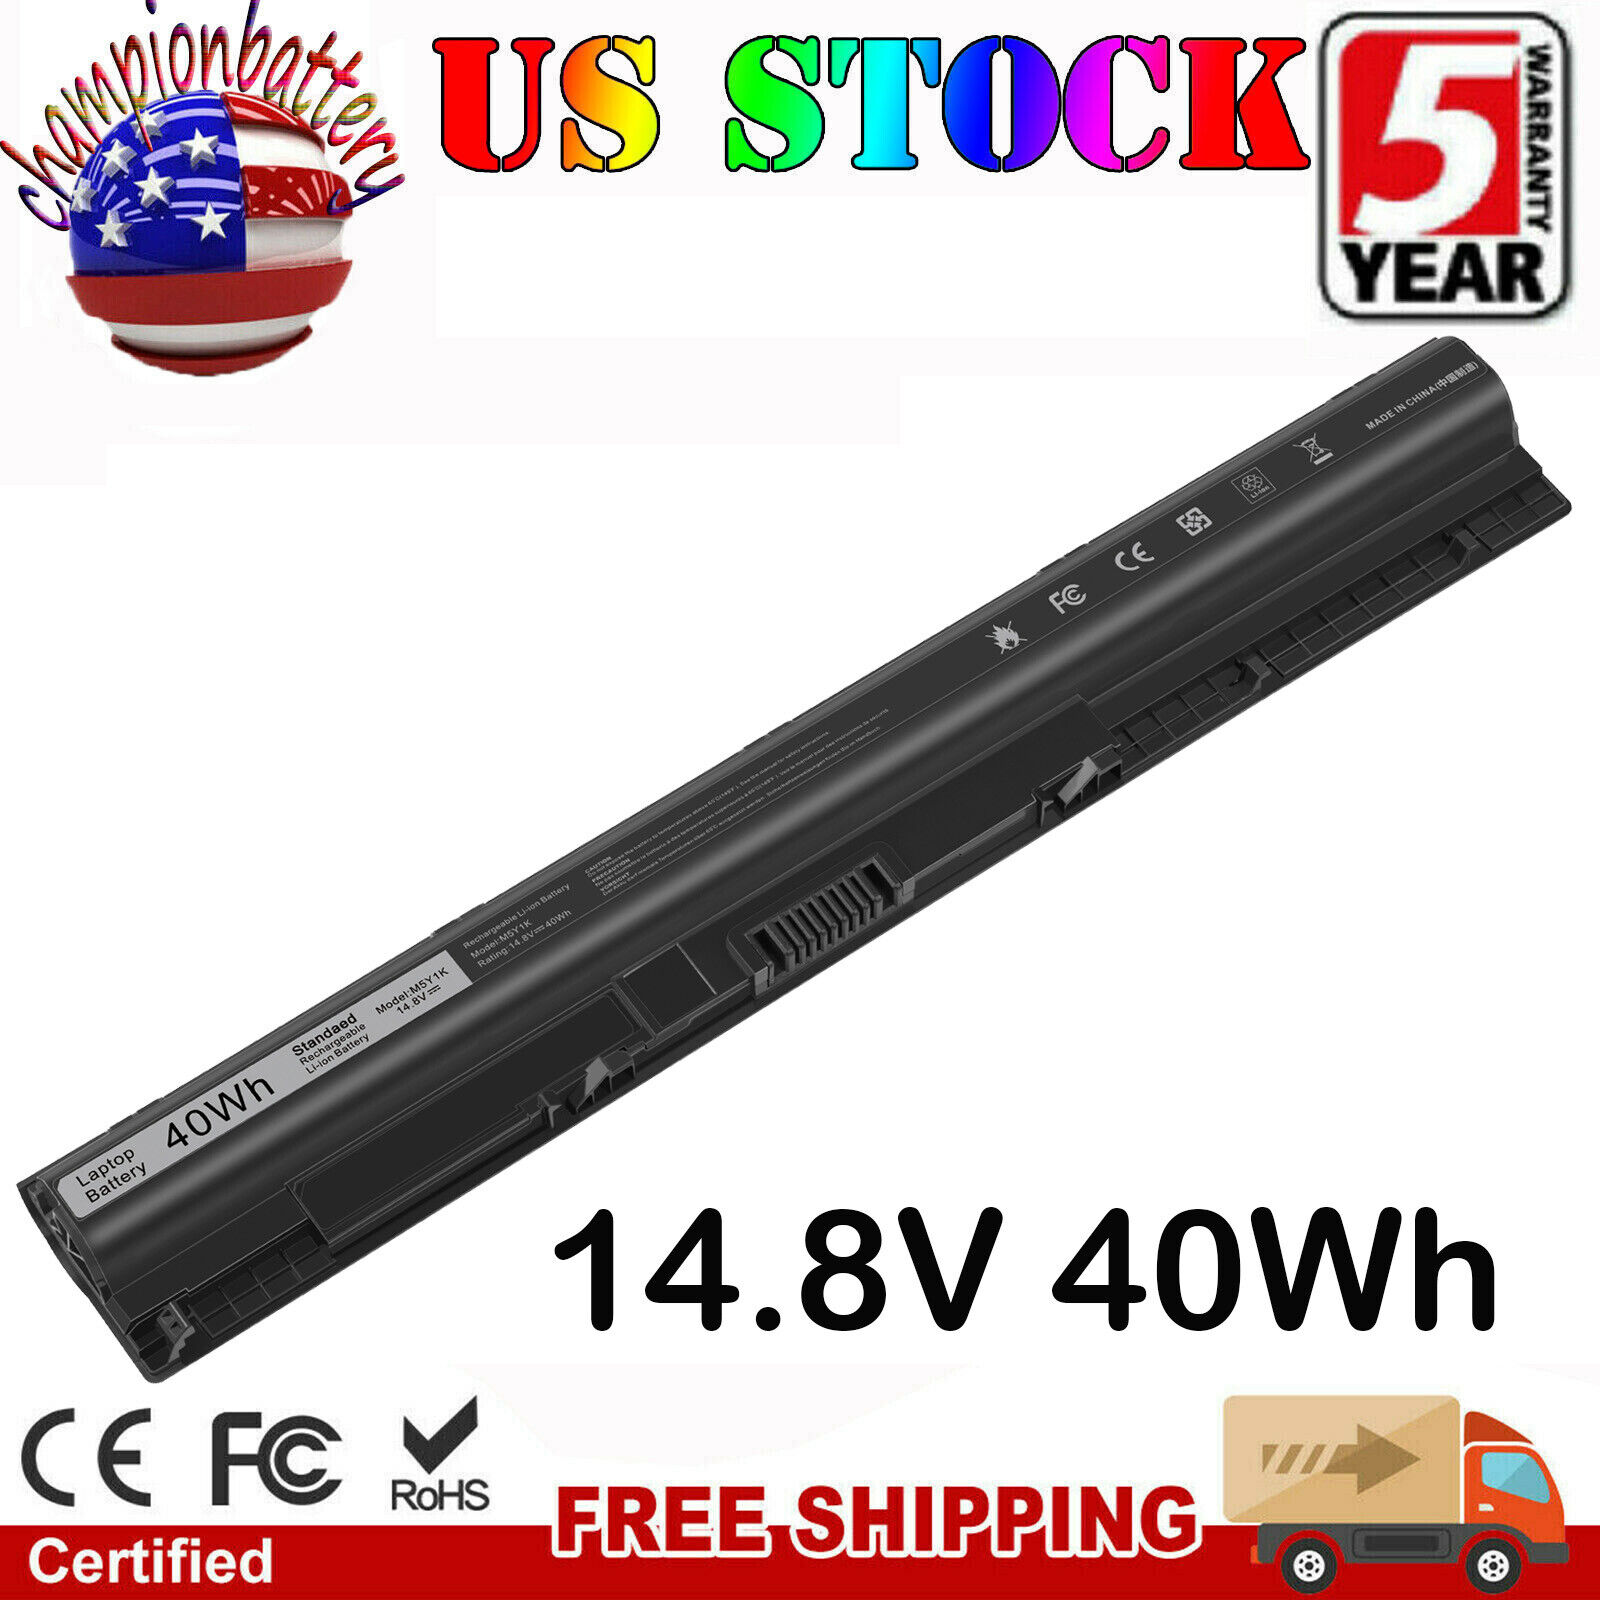 Laptop Battery For Dell Latitude 3460 3560 Inspiron 5758 5551 3551 5455 5458